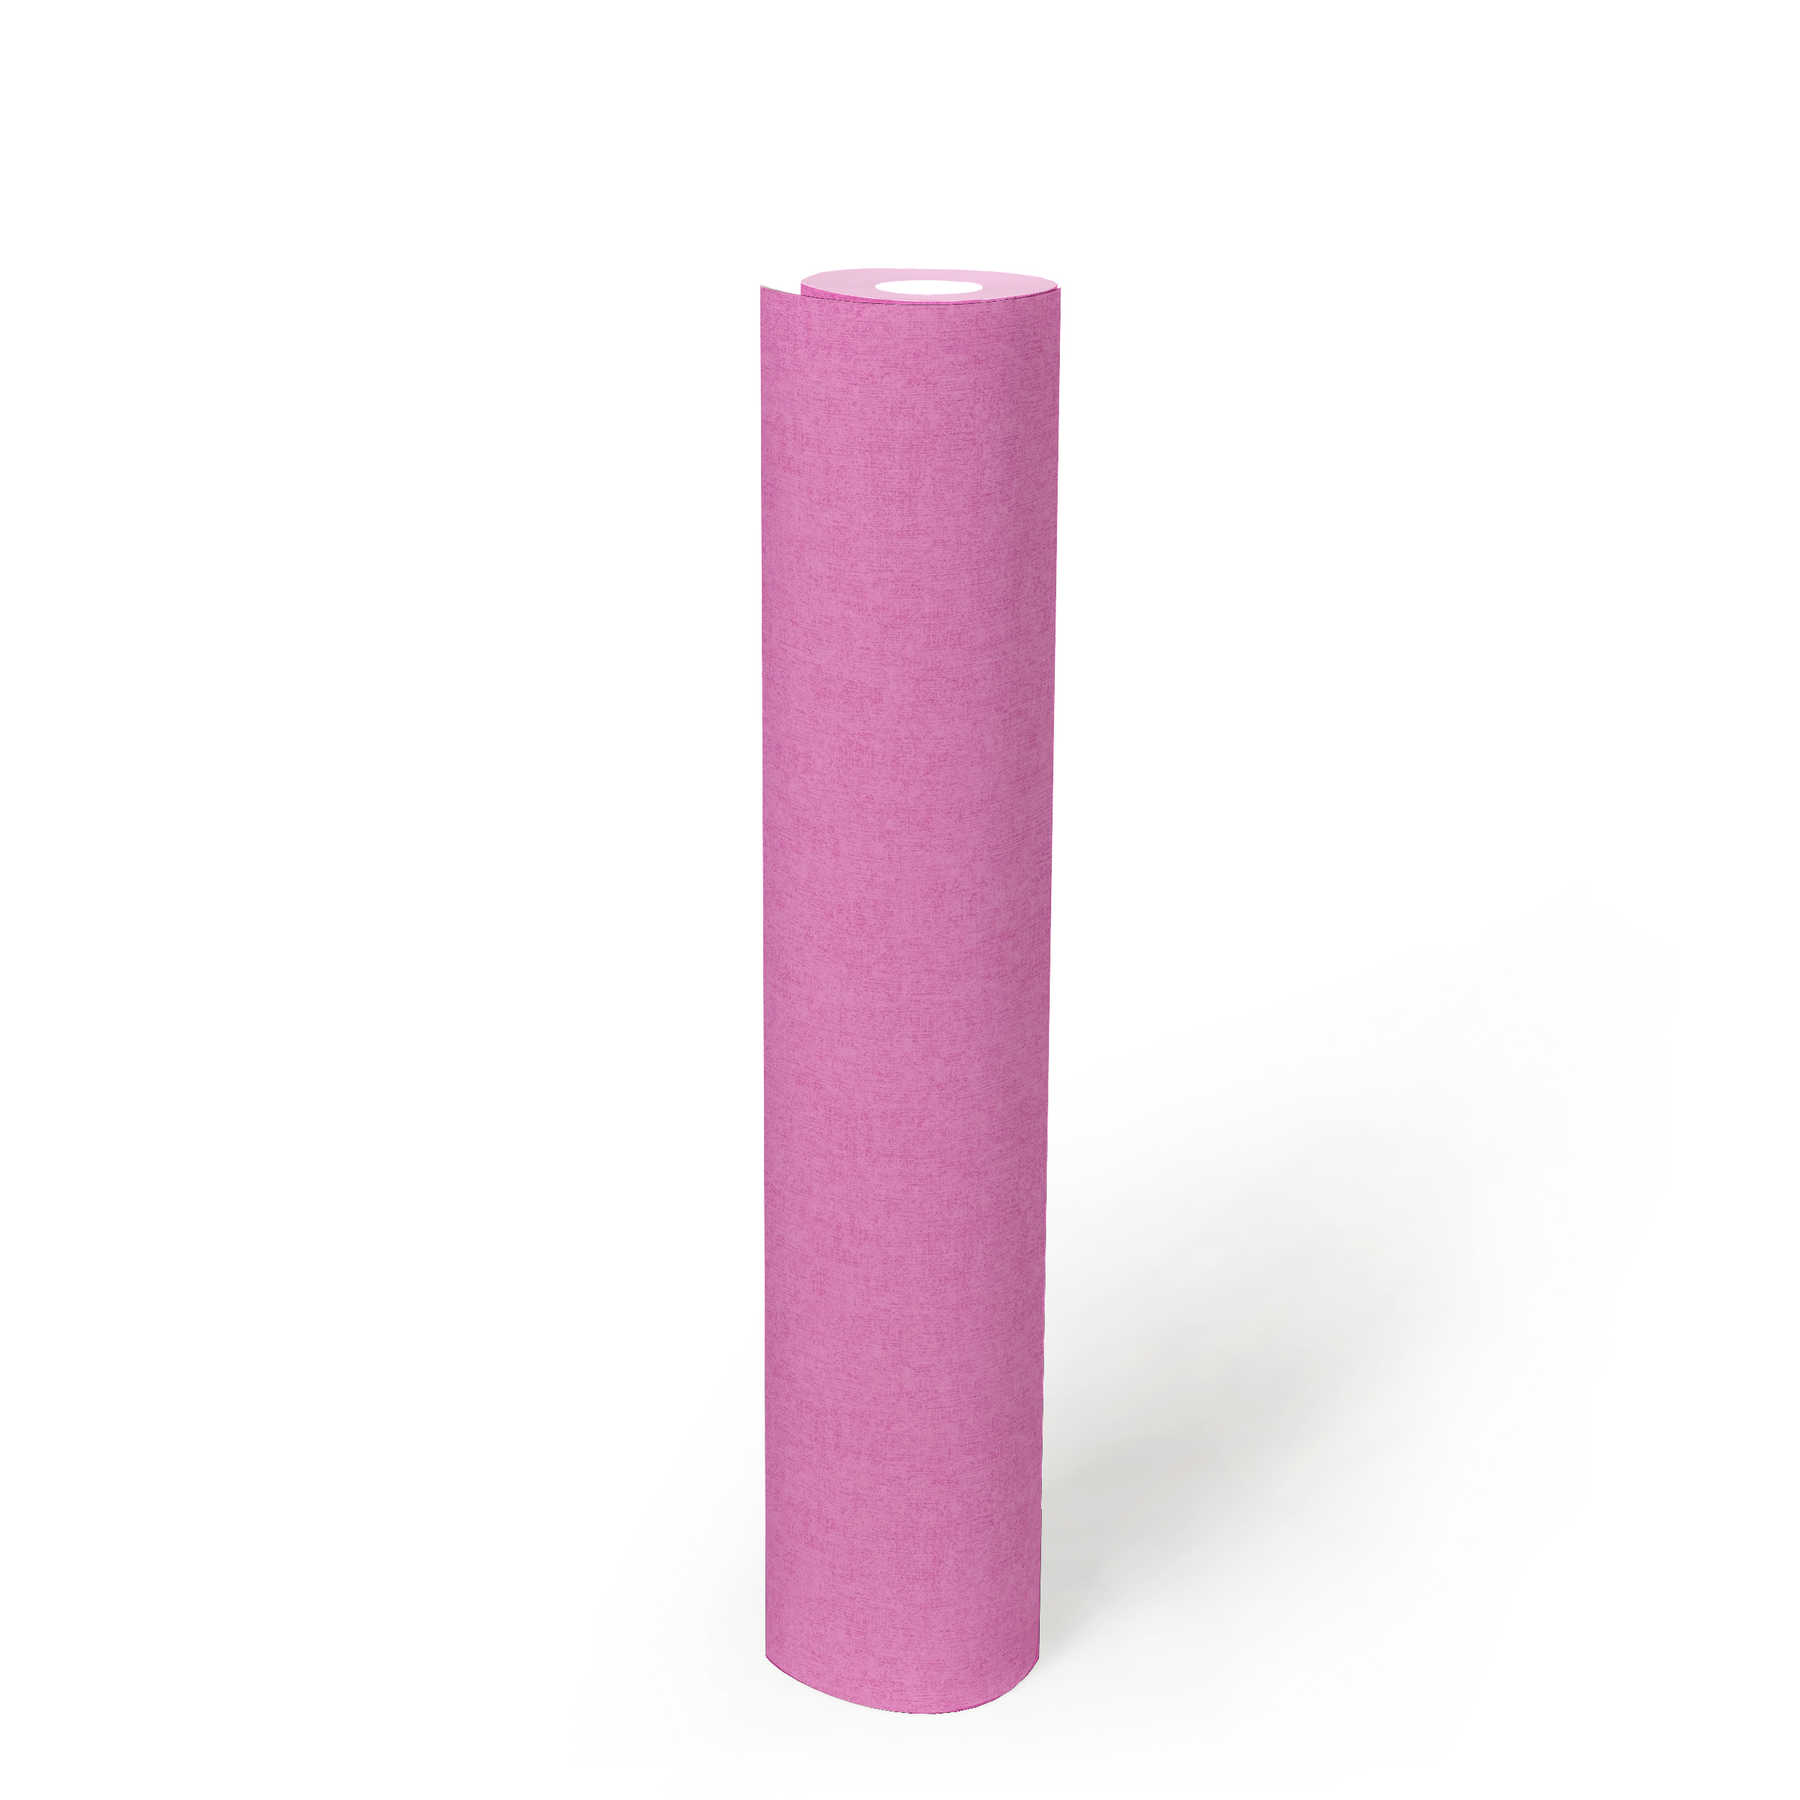             Pink non-woven wallpaper for Nursery & girls - pink
        